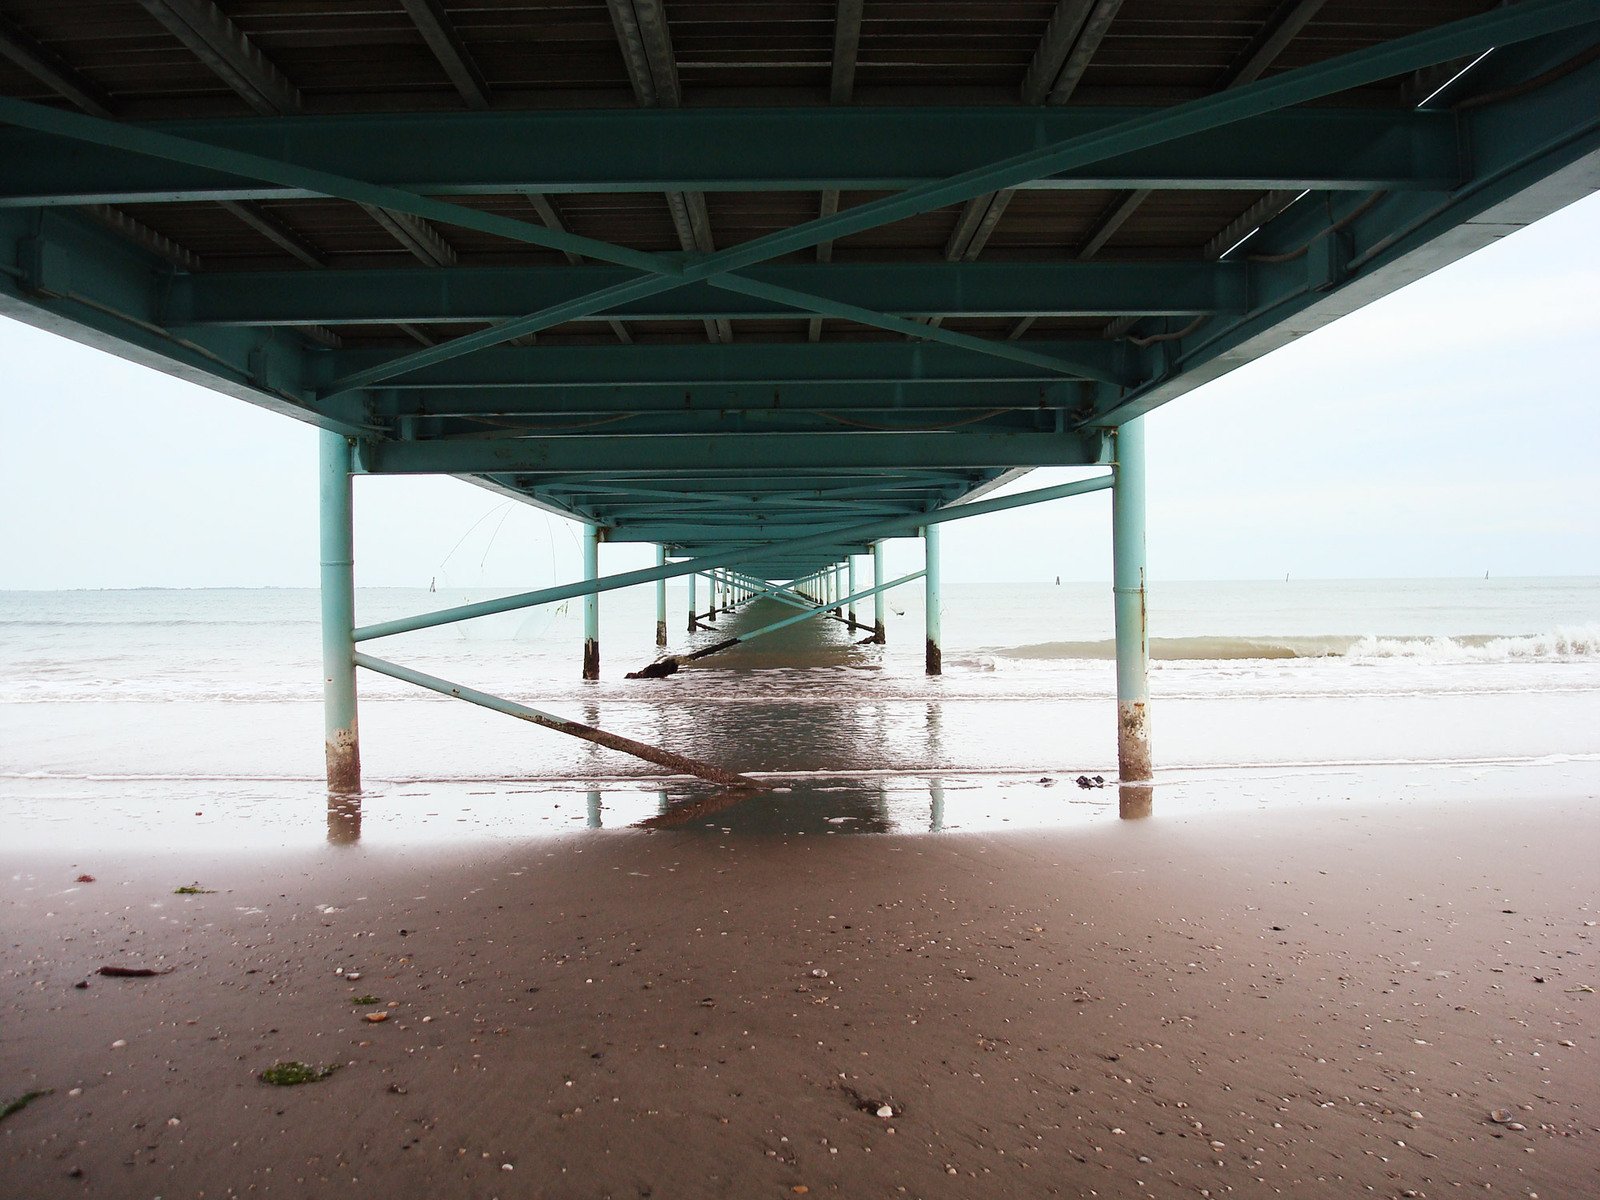 the empty beach under the large metal structure